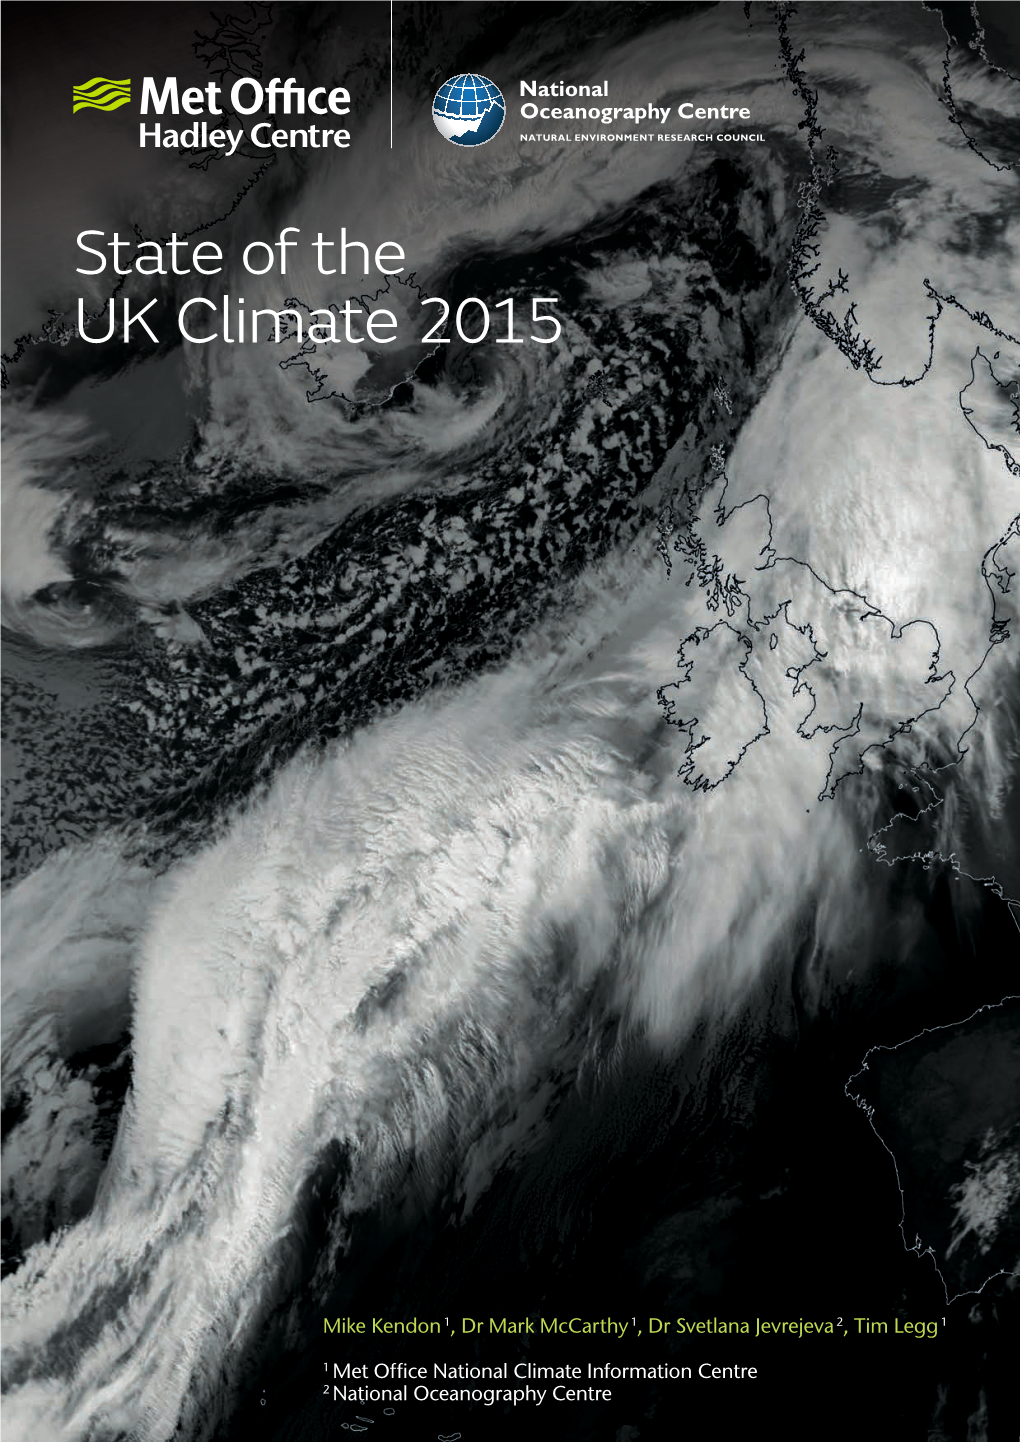 State of the UK Climate 2015